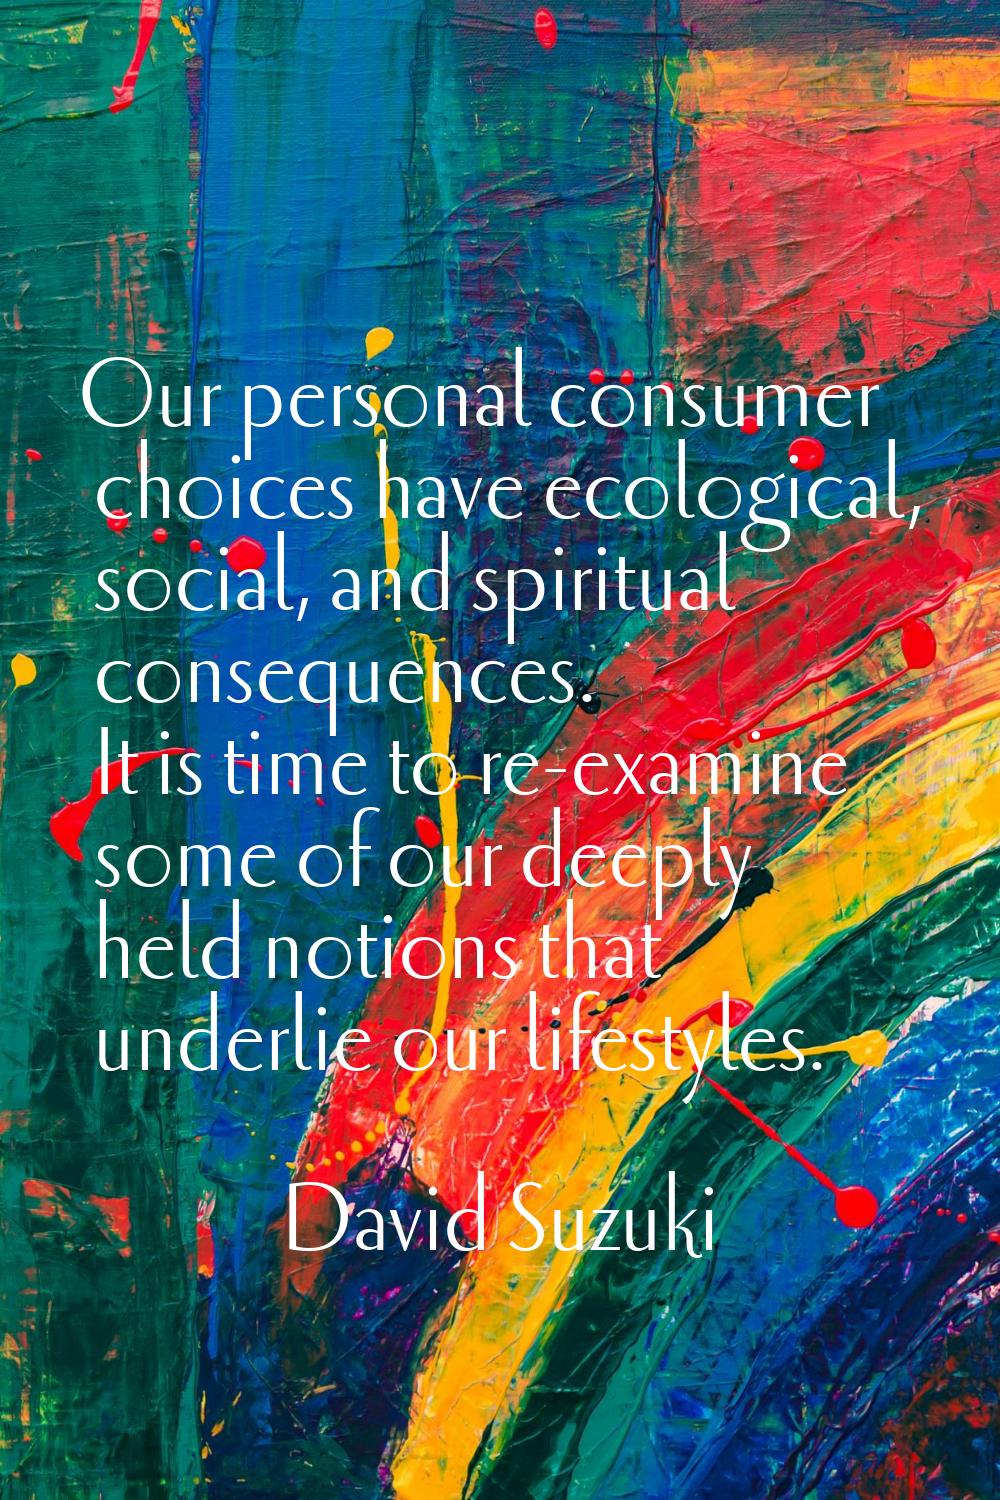 Our personal consumer choices have ecological, social, and spiritual consequences. It is time to re